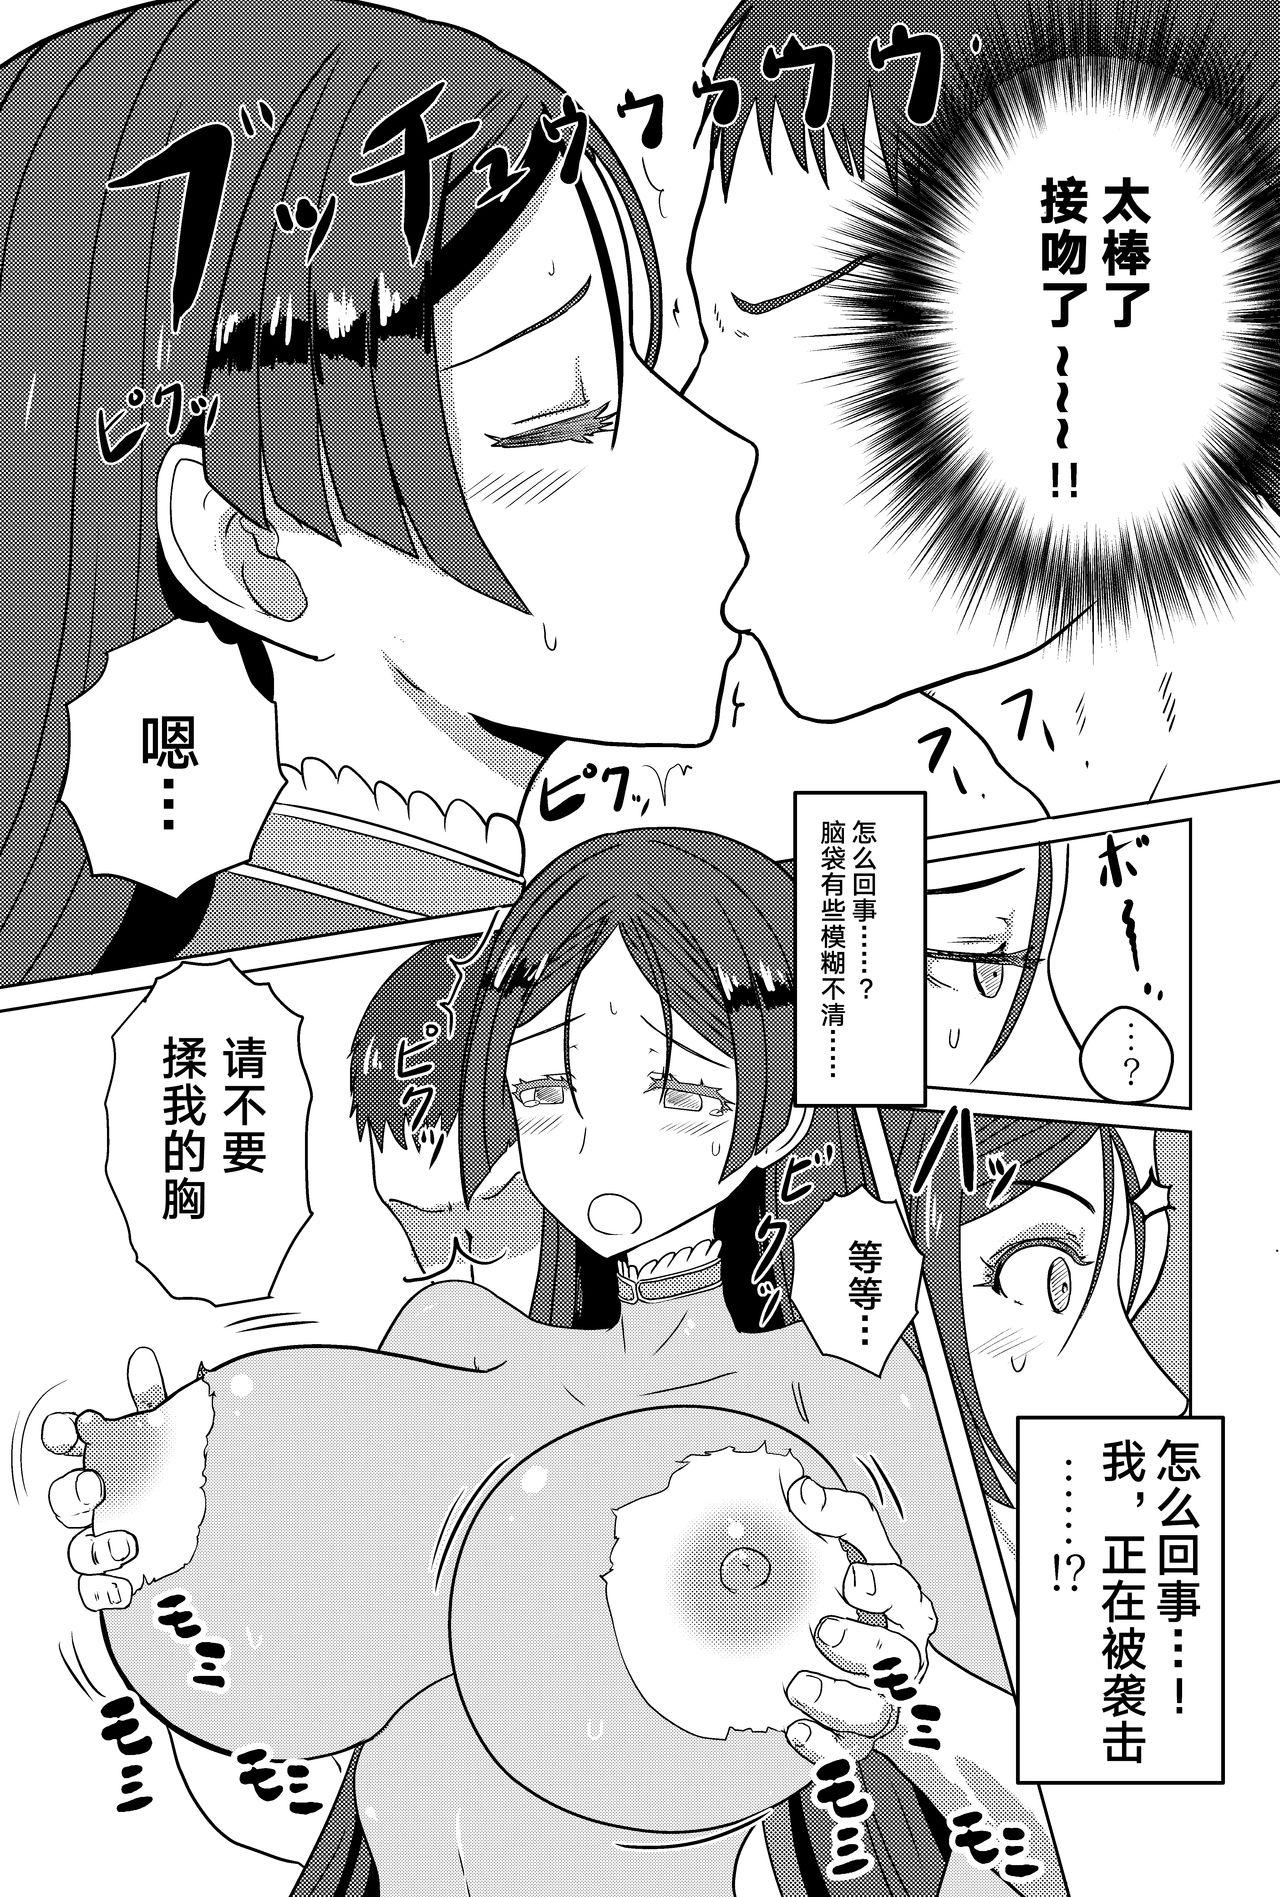 Missionary Position Porn 頼光ママとえっちする本 - Fate grand order Free Blow Job - Page 5